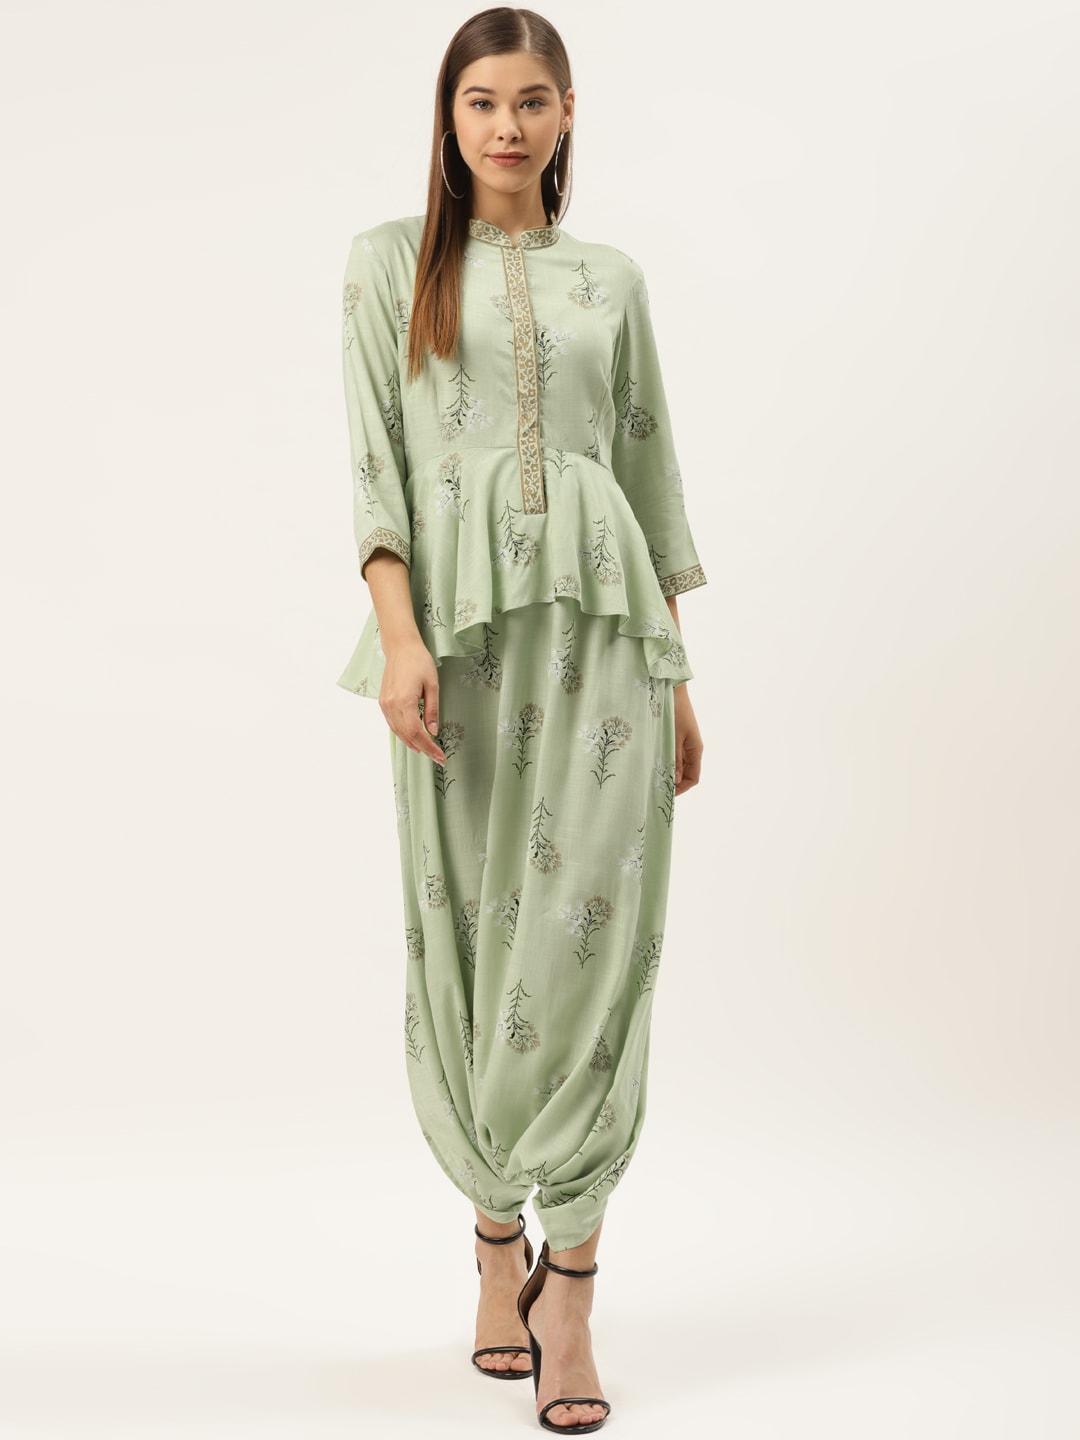 MABISH by Sonal Jain Women Green & Golden Printed Drop Crotch Jumpsuit Price in India